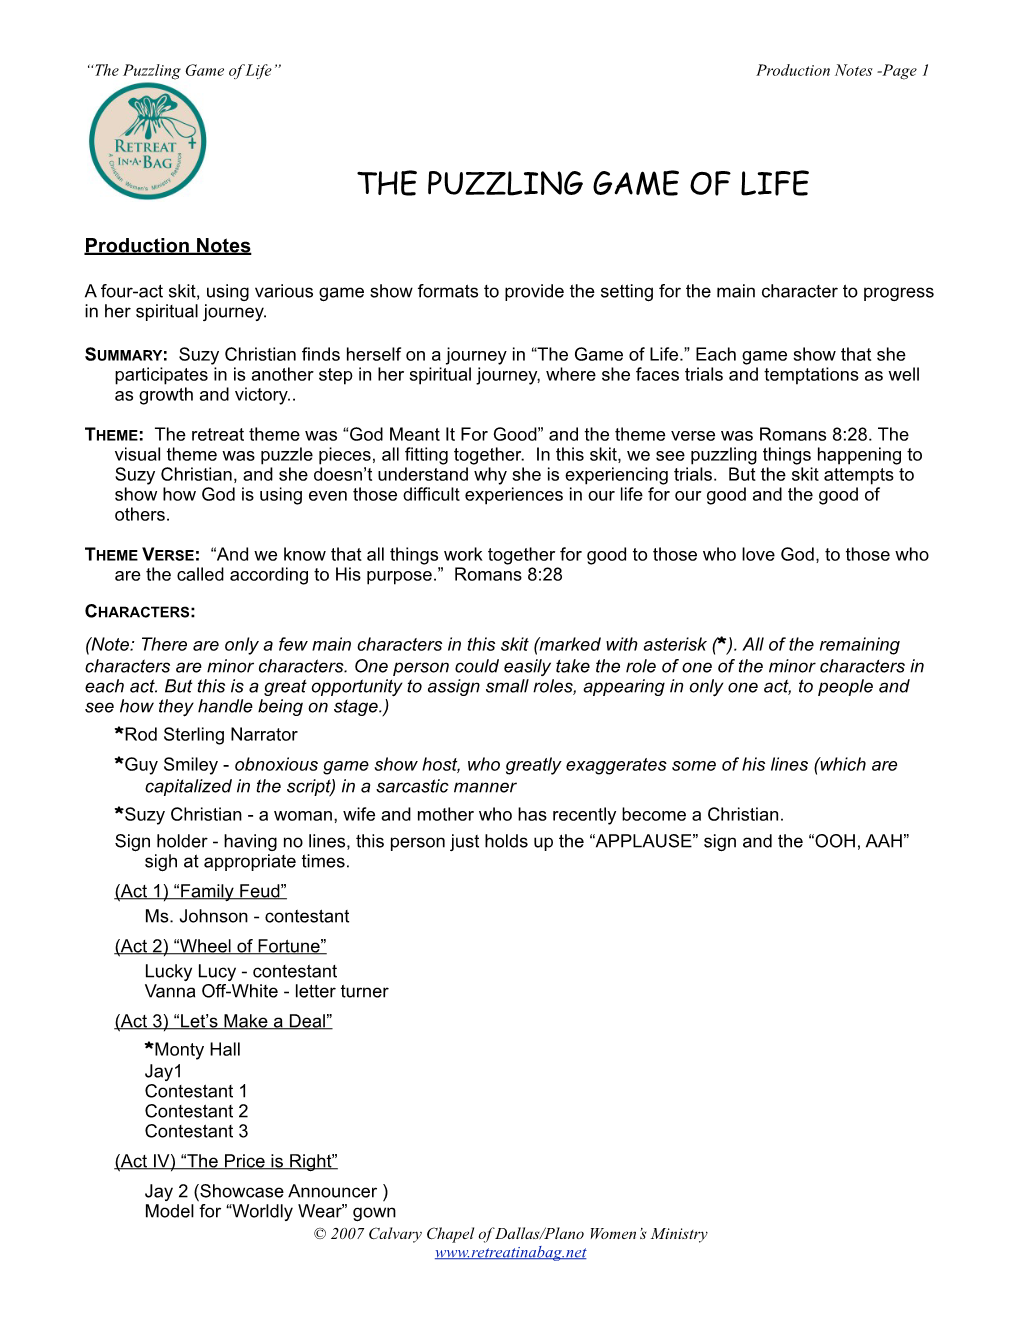 Puzzling Game of Life” Production Notes -Page 1